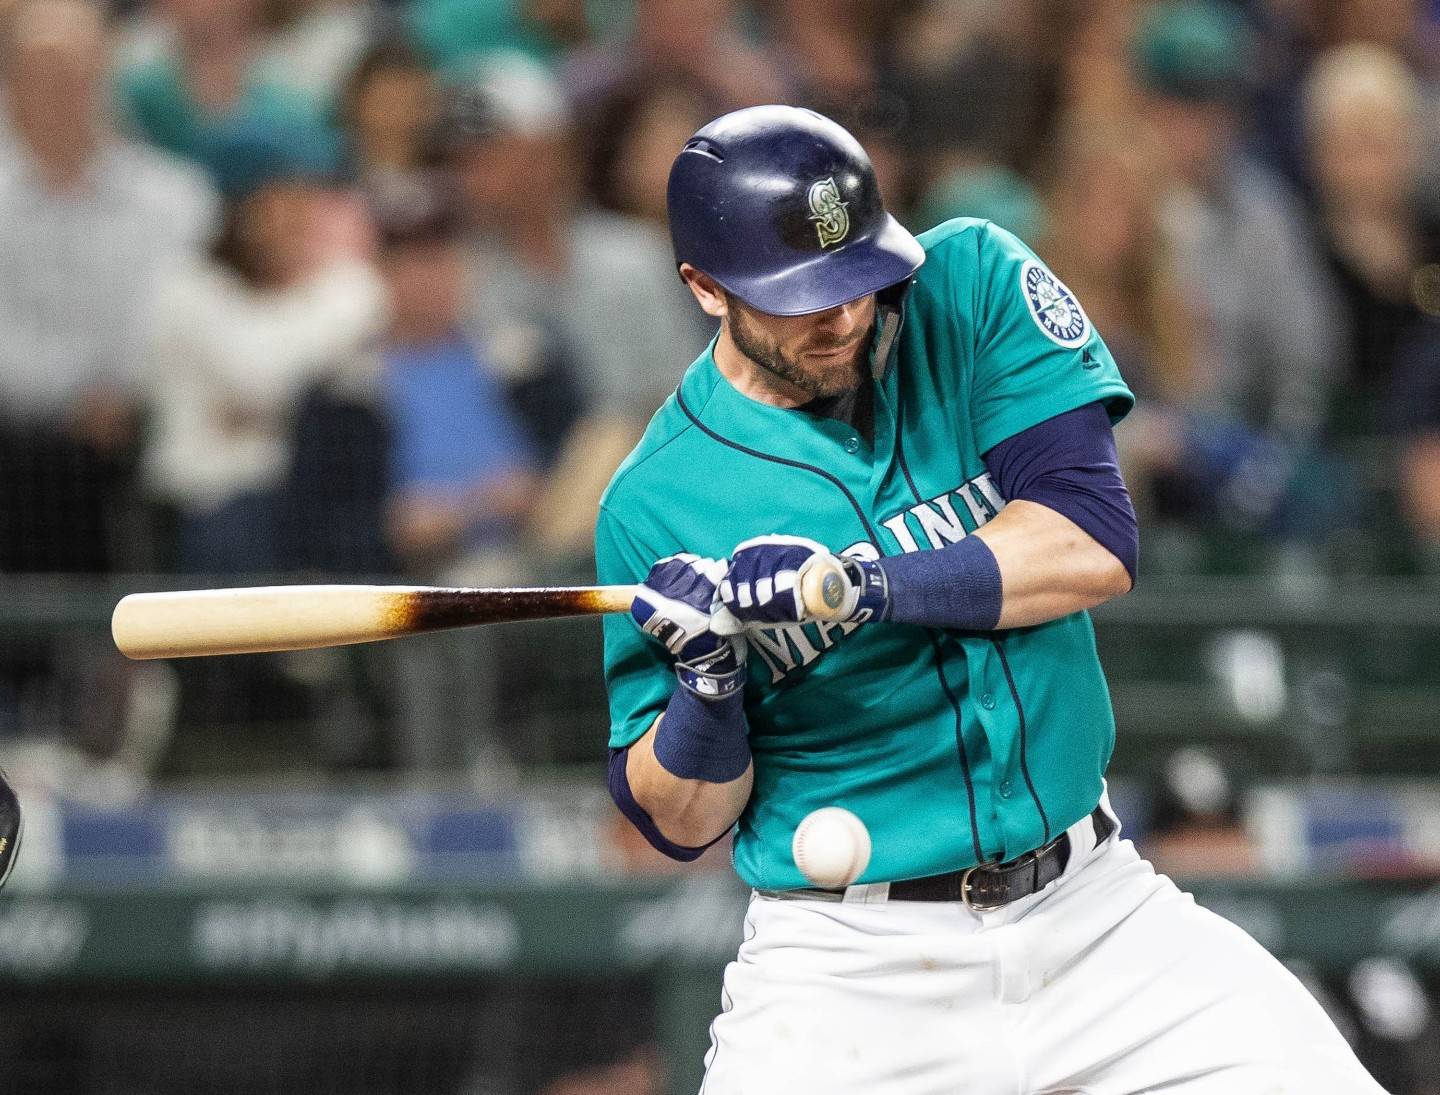 Seattle Mariners’ Mitch Haniger is hit by a pitch in the eighth inning against the Chicago White Sox on Friday, July 20, 2018 at Safeco Field in Seattle, Wash. (Dean Rutz/Seattle Times/TNS)